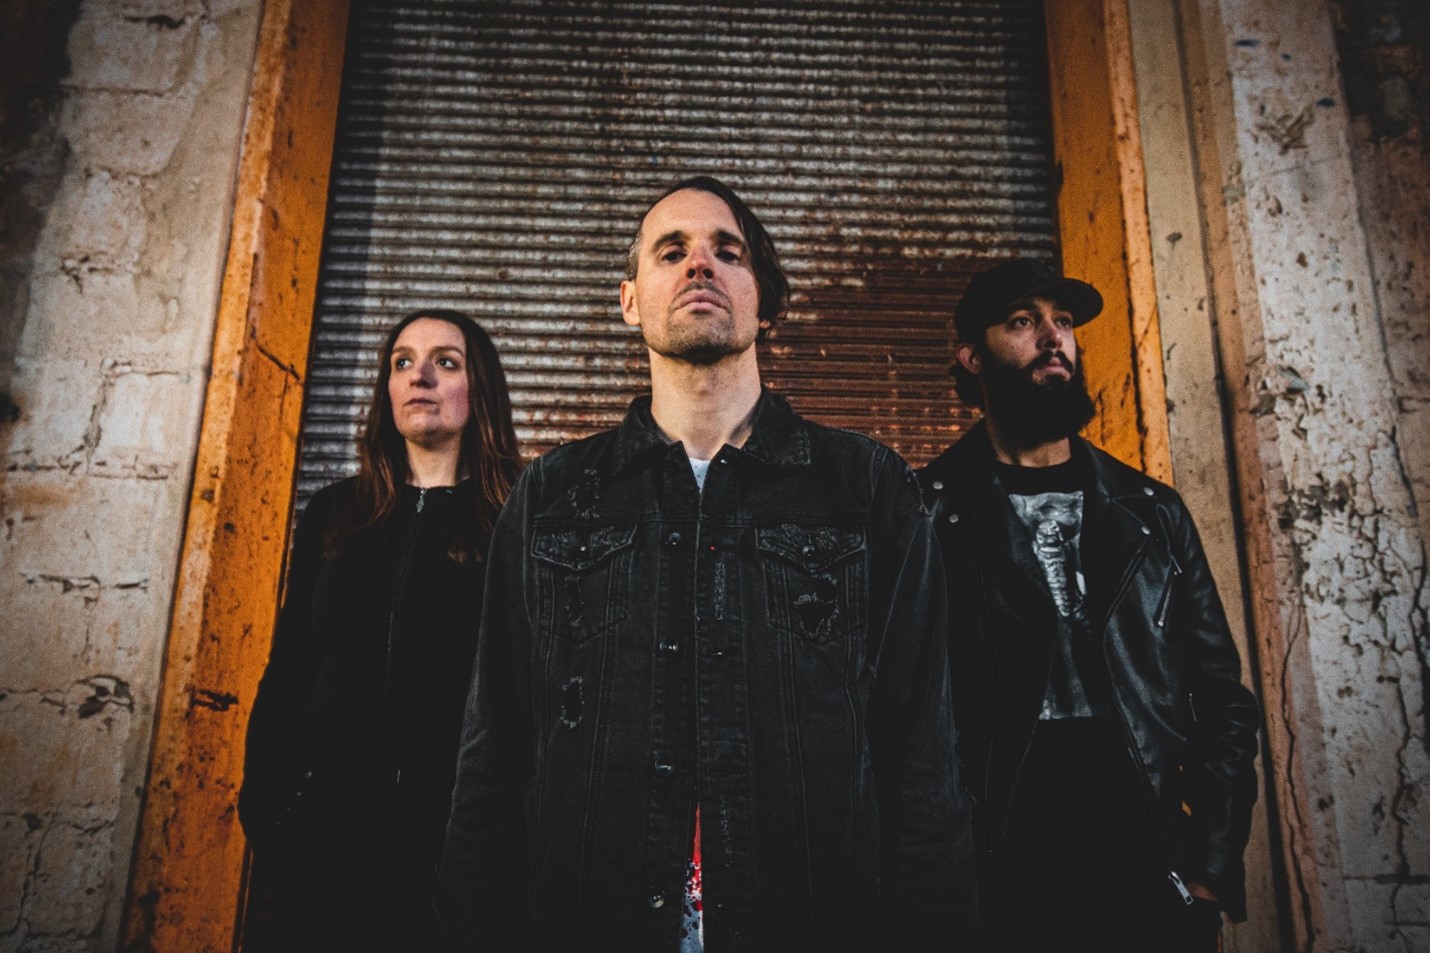 Grunge Alt-Rockers NeoNera Reevaluate Society’s Misguided “Saviour” Complex in New Single & Video